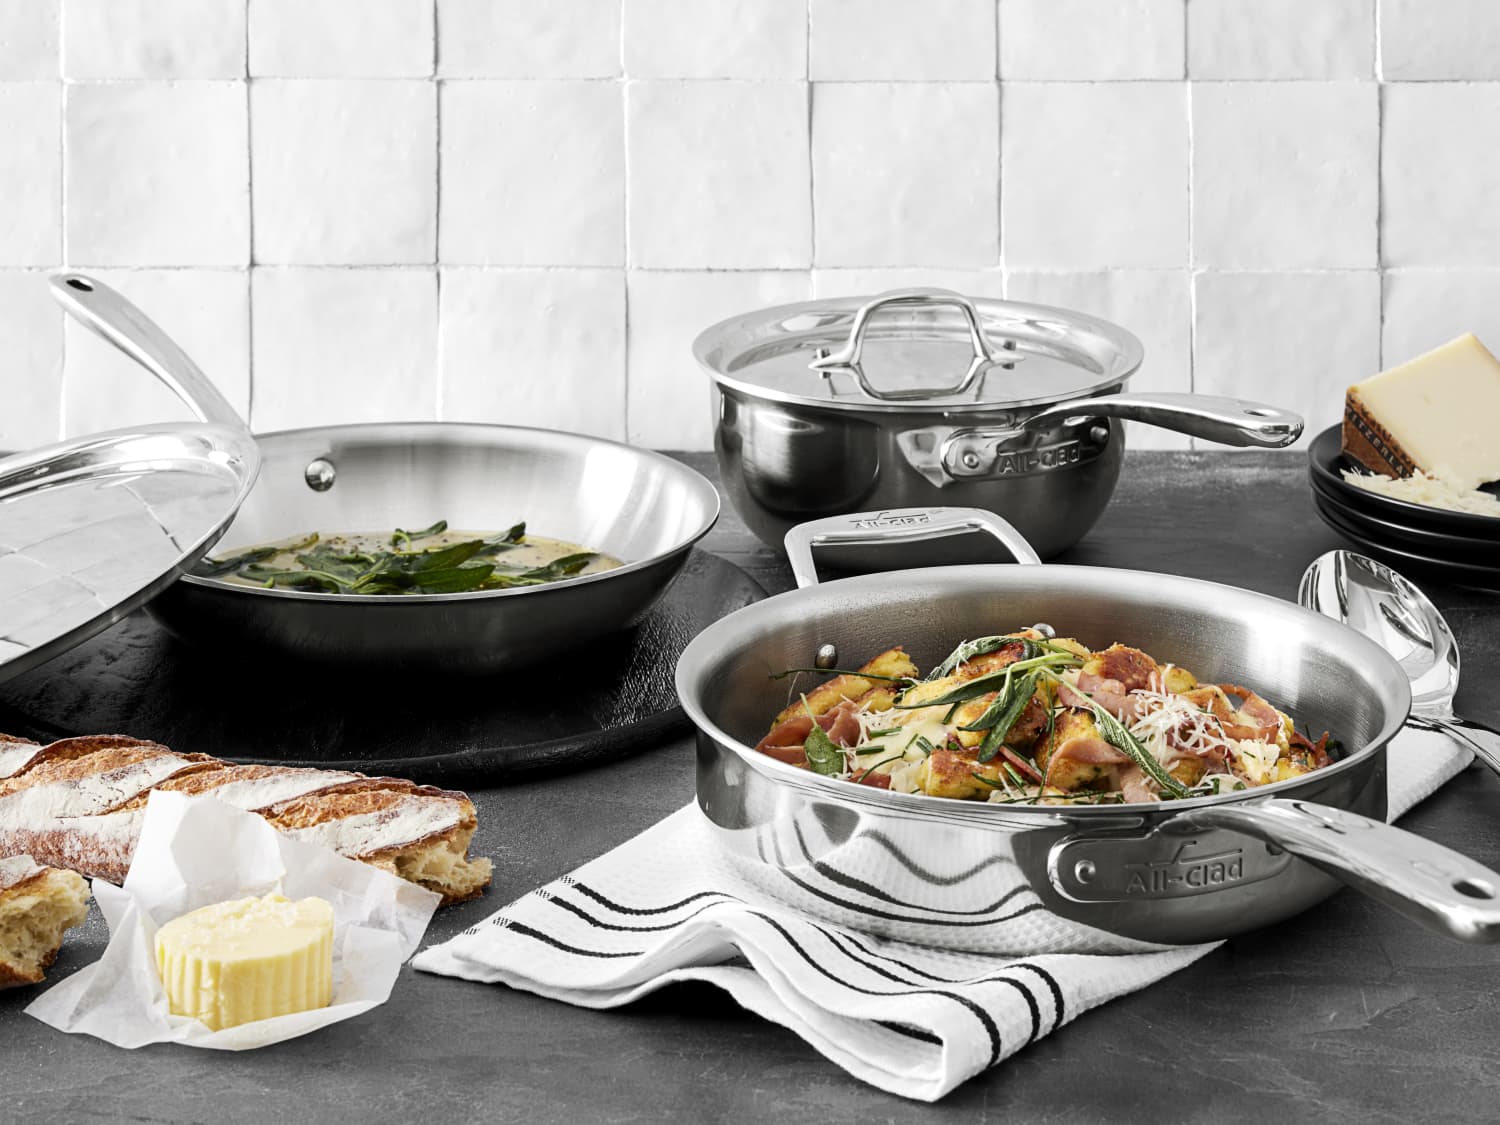 All-Clad d5 Stainless-Steel Nonstick Frying Pan